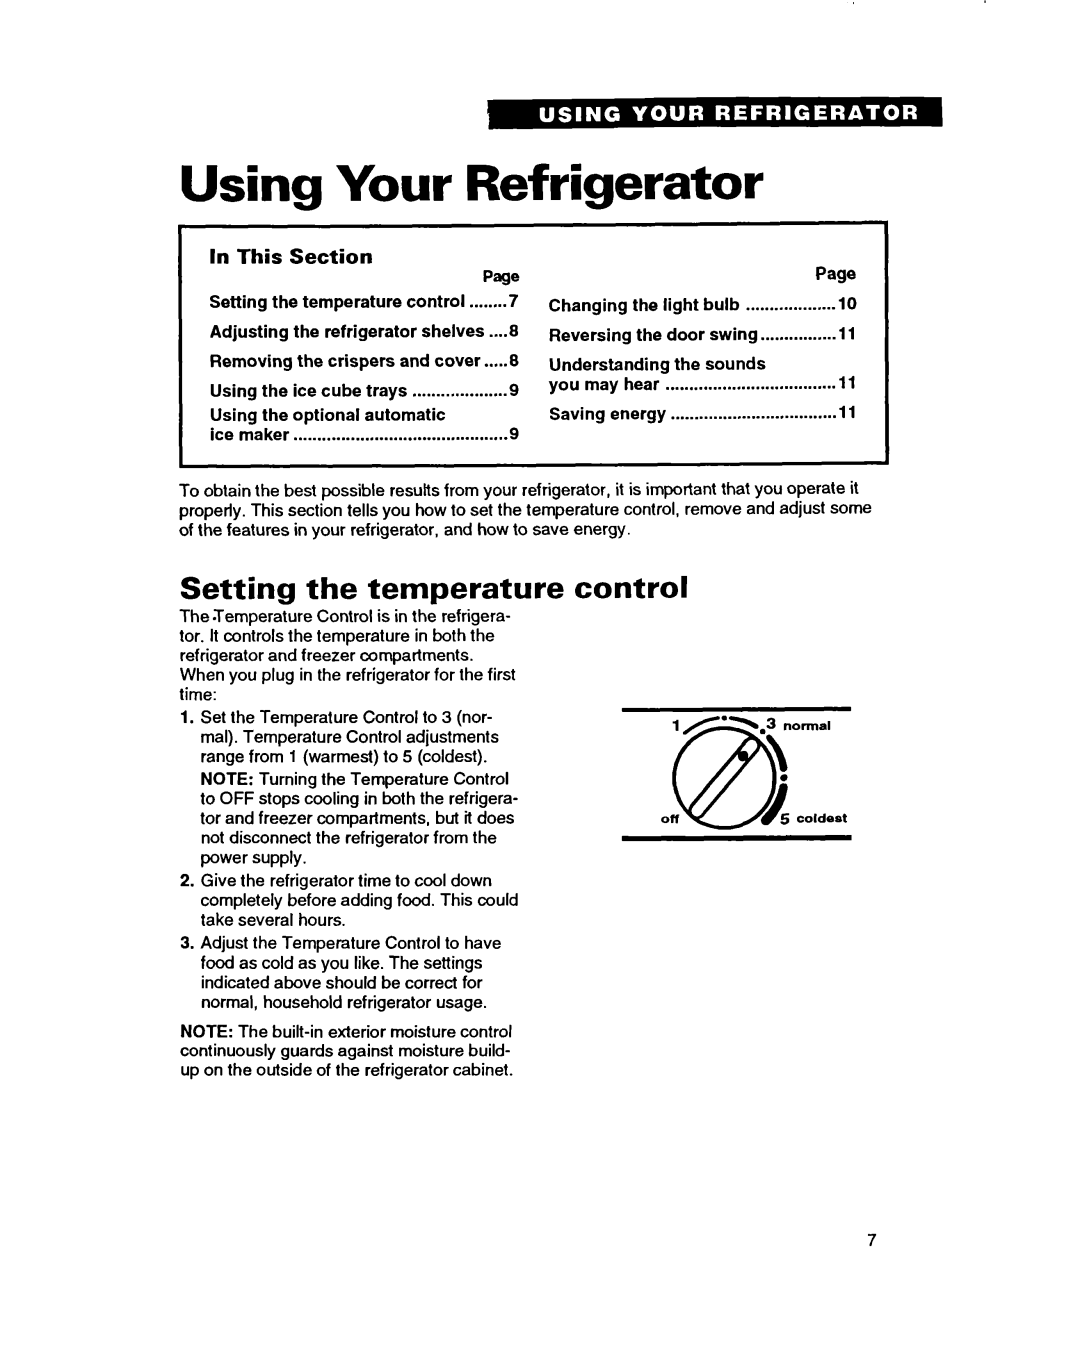 Whirlpool TT14HD, TT14DK Using Your Refrigerator, Setting the temperature control, In This Section, Page 